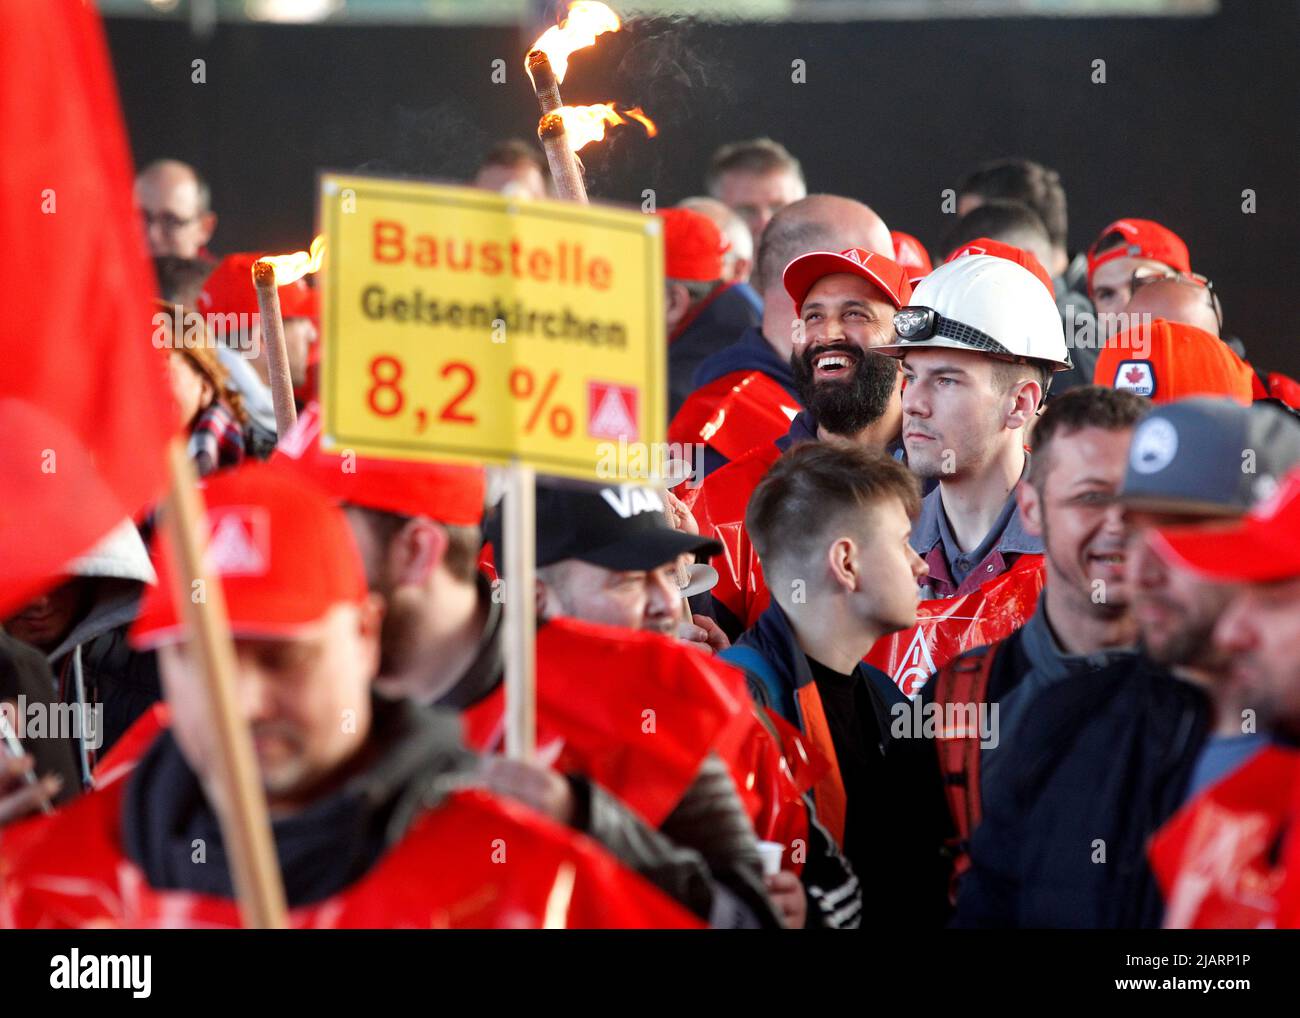 Gelsenkirchen, Germany. 01st June, 2022. In the first warning strikes in the wage dispute in the northwestern German steel industry, thyssenkrupp Electrical Steel workers take part with a sign reading 'Baustelle 82, Prozent'. Credit: Roland Weihrauch/dpa/Alamy Live News Stock Photo